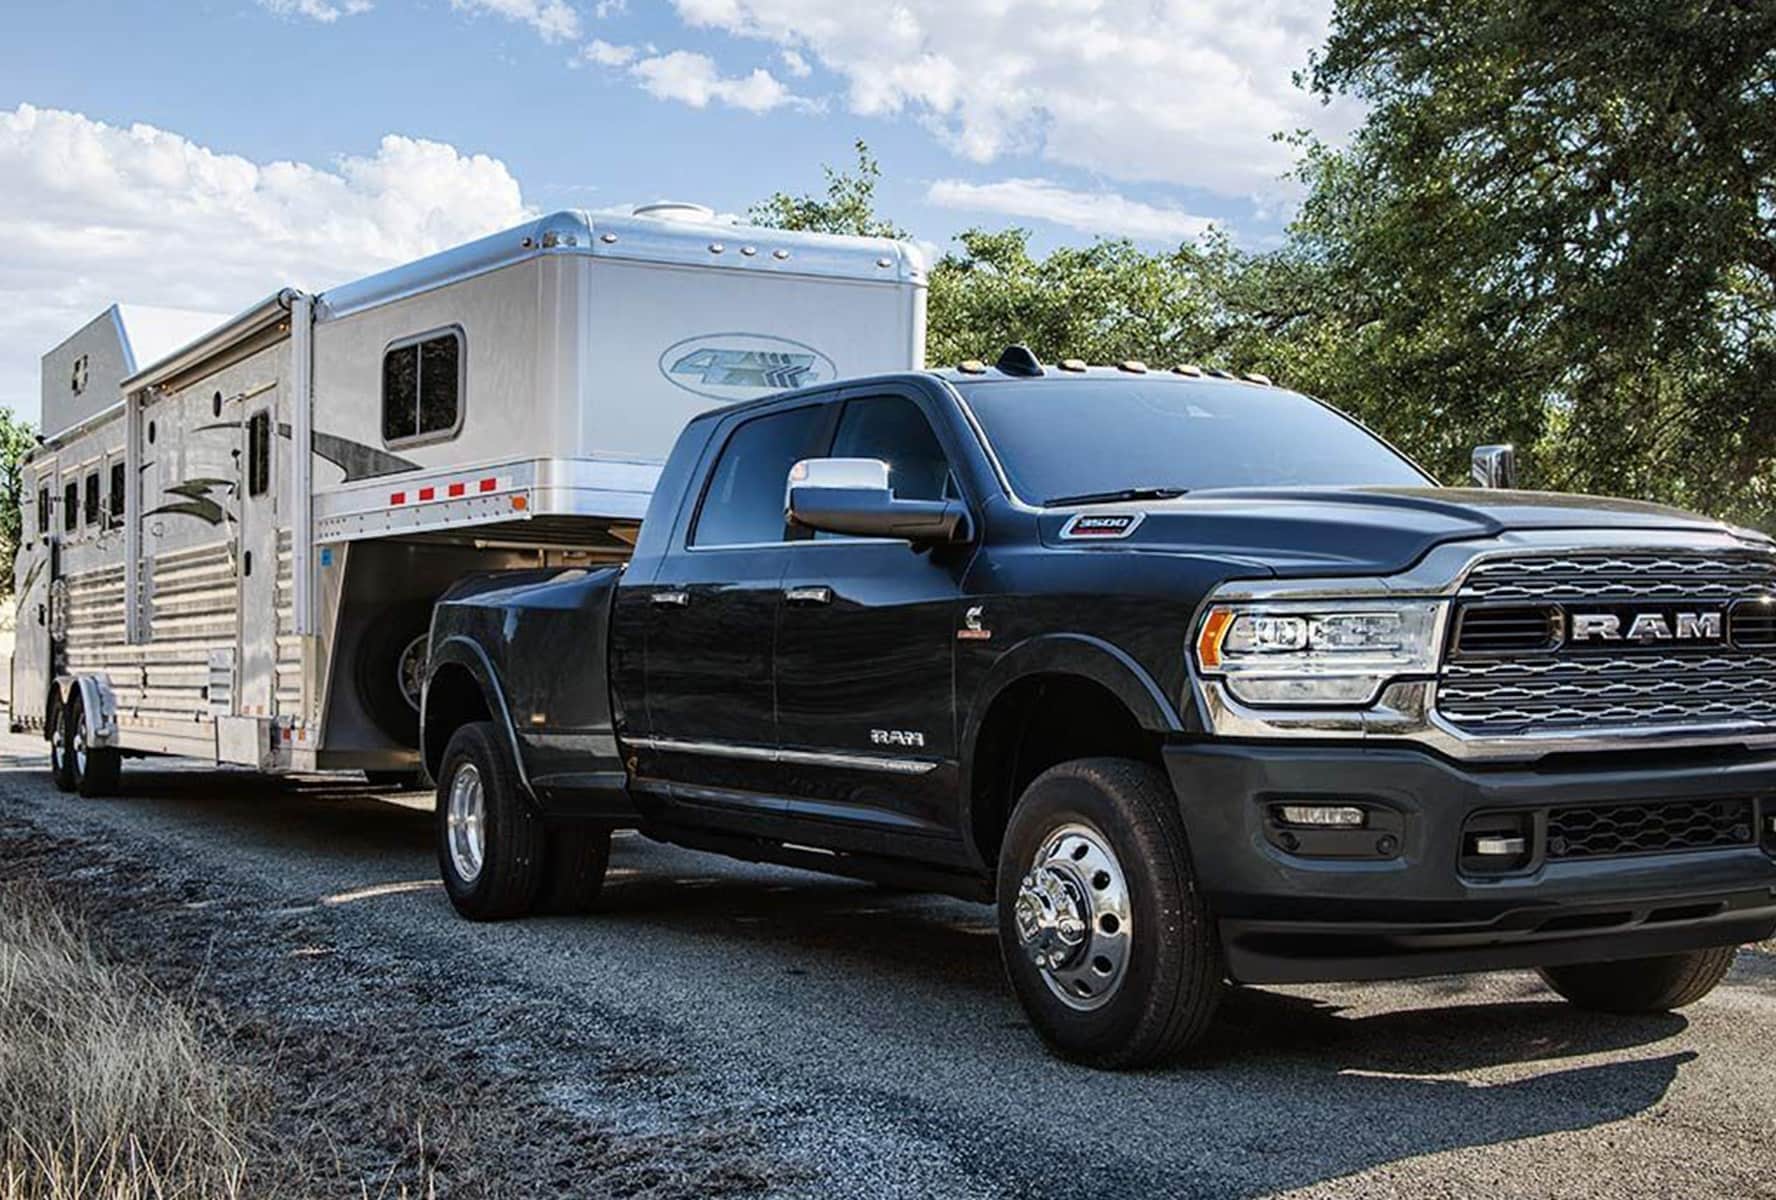 2019 Ram Towing Capacity and Engine Options | Northgate Chrysler Dodge Jeep, Inc. 2019 Dodge Ram 3500 Diesel Towing Capacity